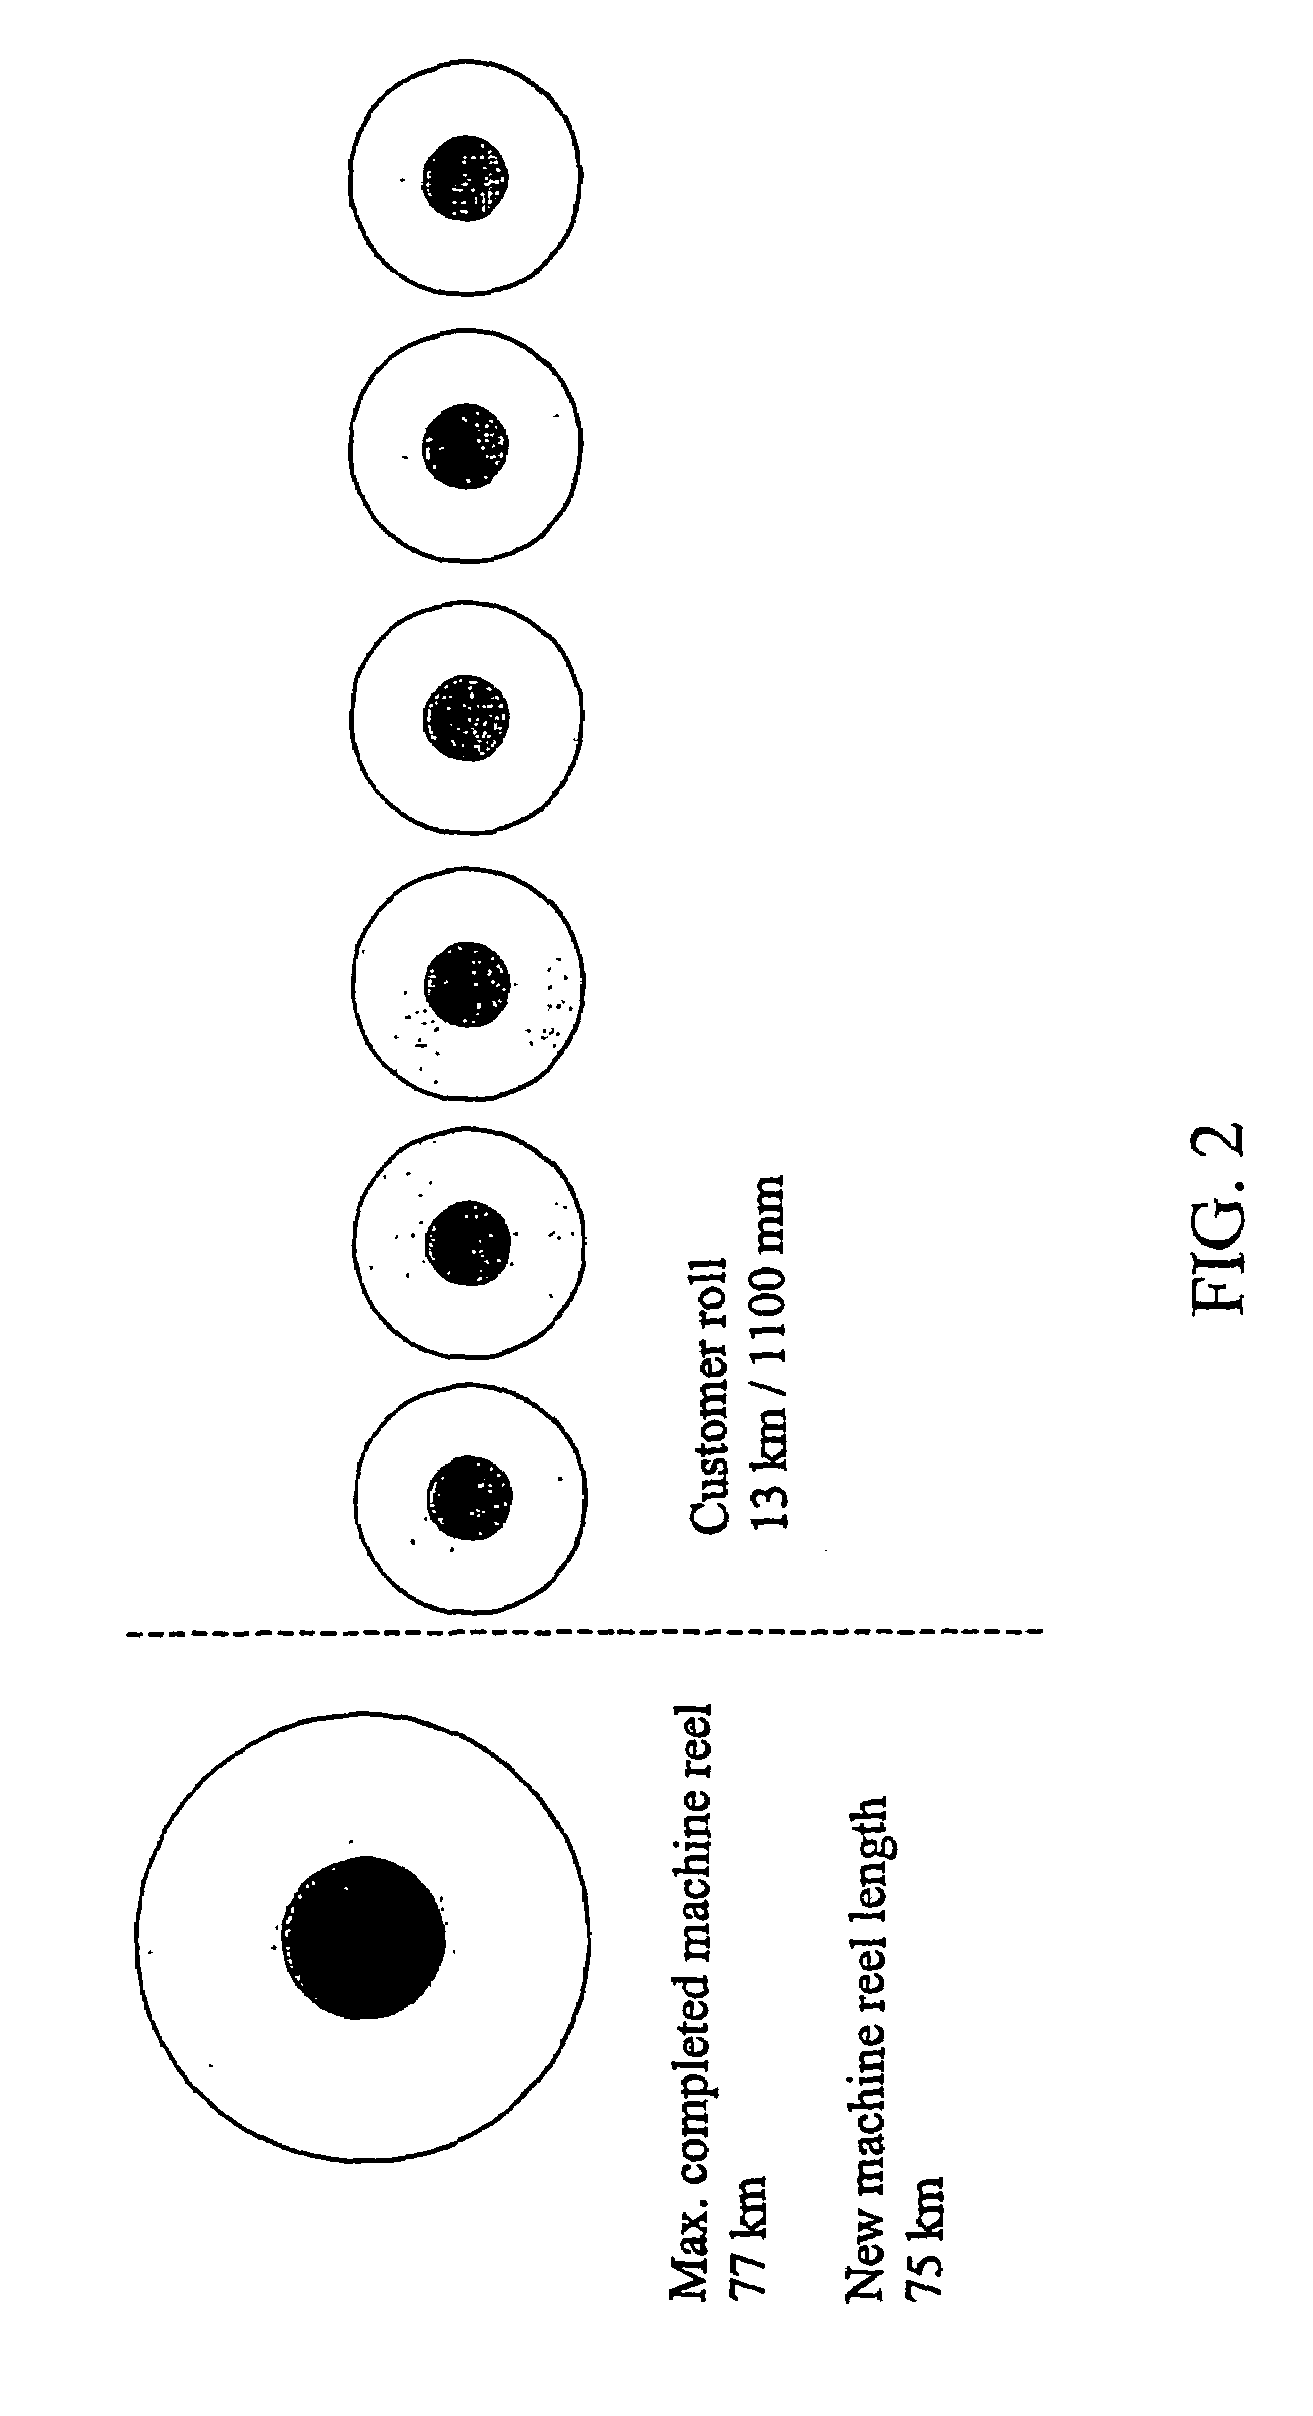 Method for calculating and optimizing the diameter of a paper or board web reel based on customer splice location restrictions